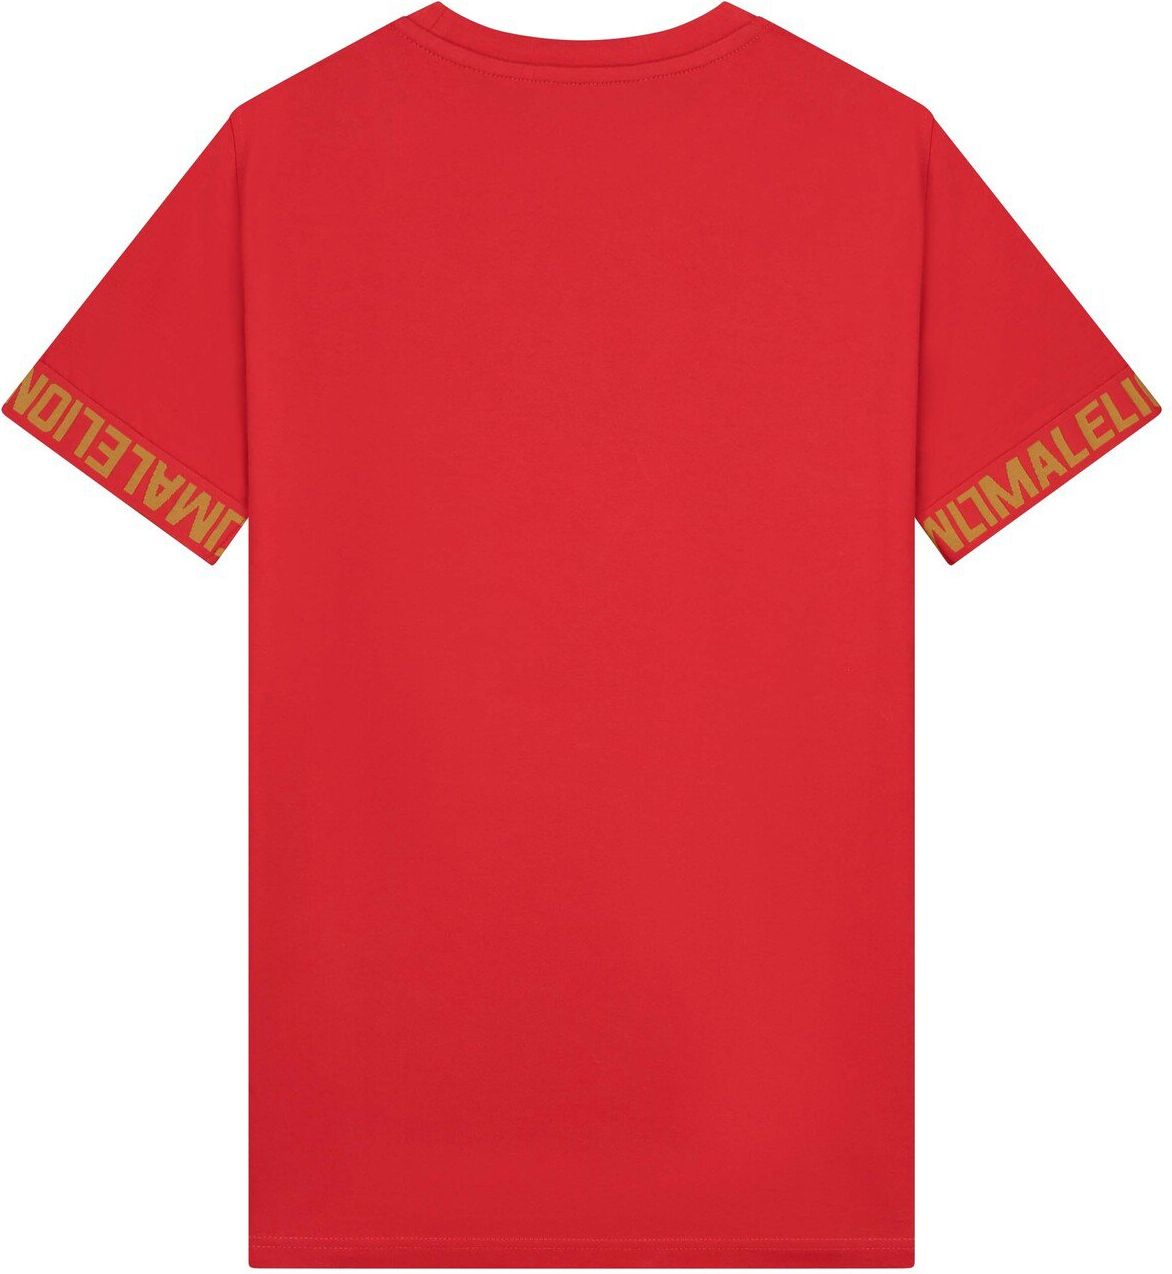 Malelions Venetian T-Shirt - Red/Gold Rood